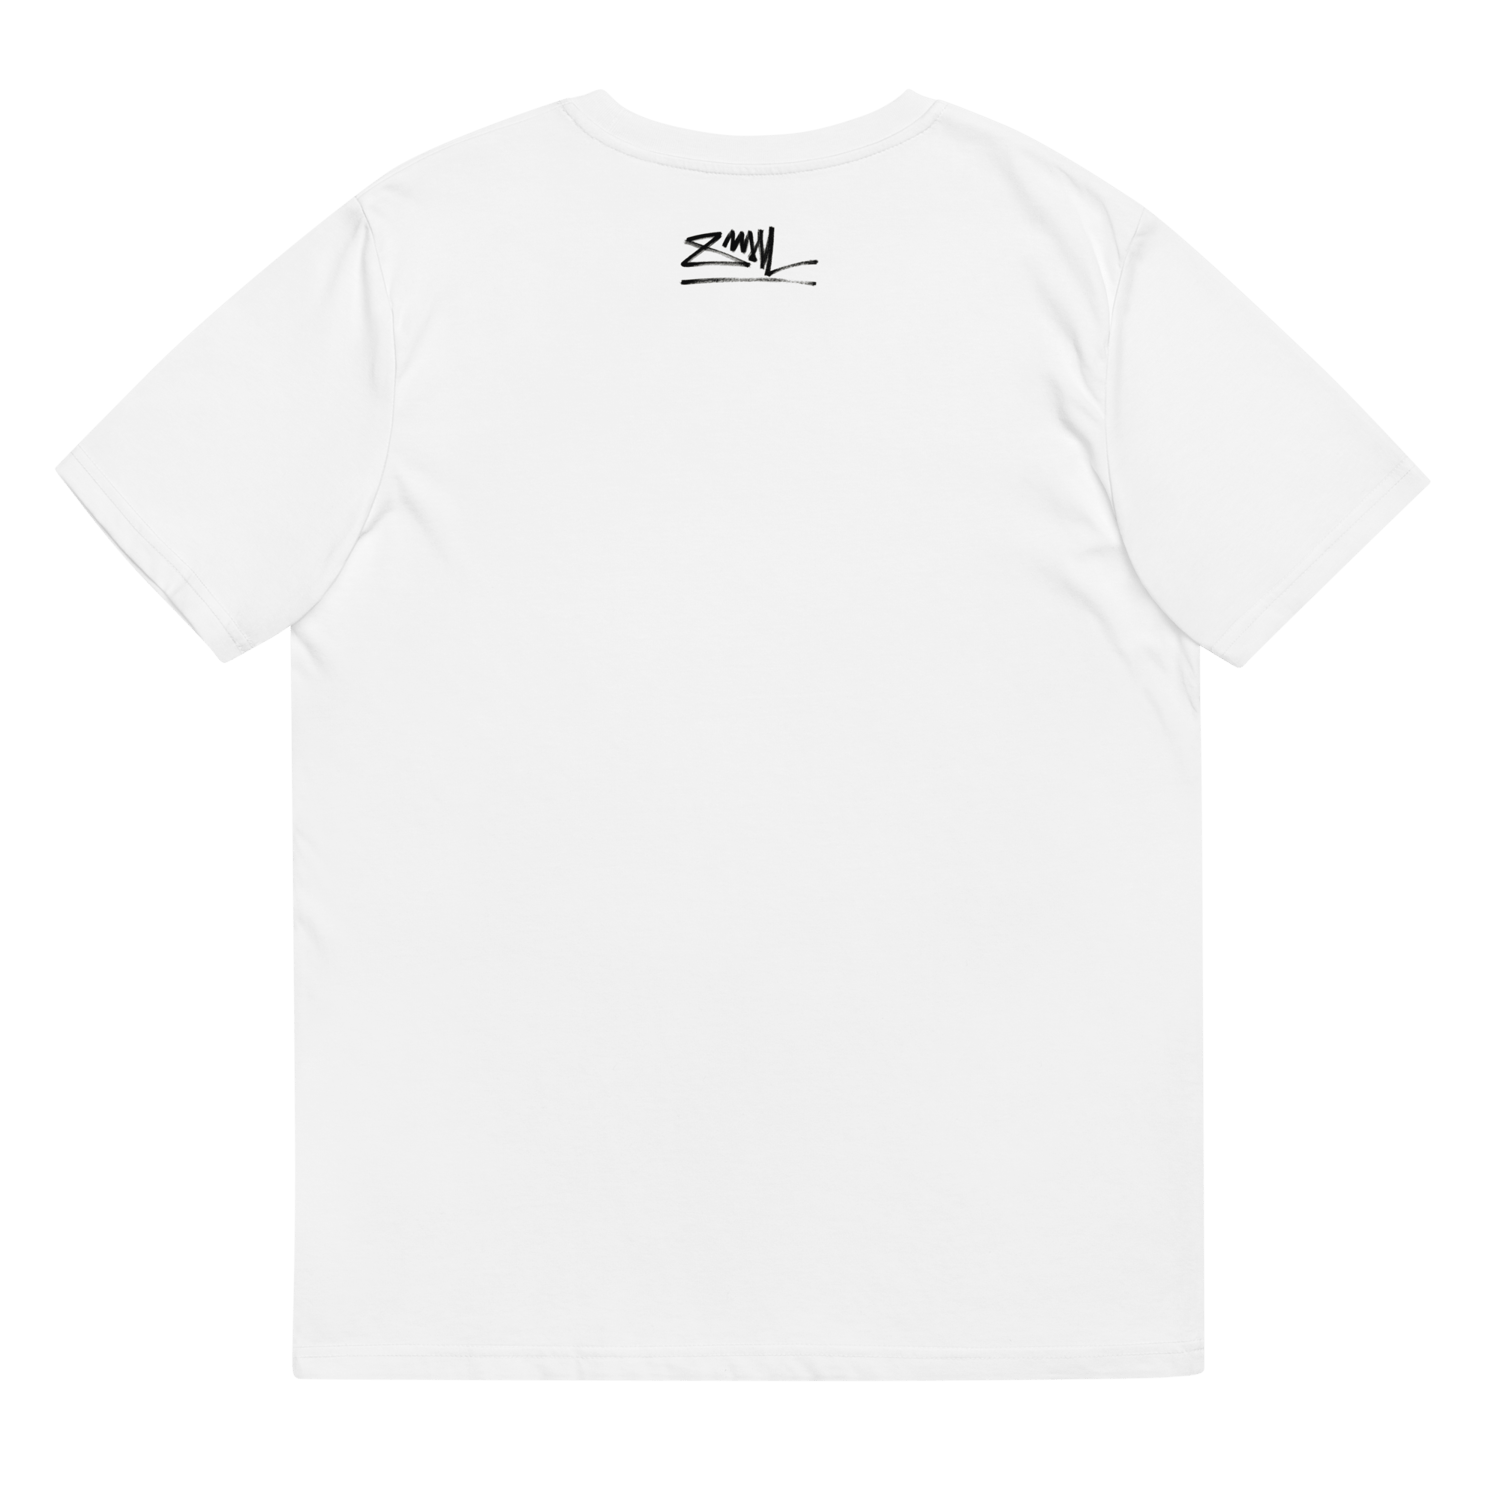 Image of Fund the NHS (Charity release) Embroidered Unisex t-shirt